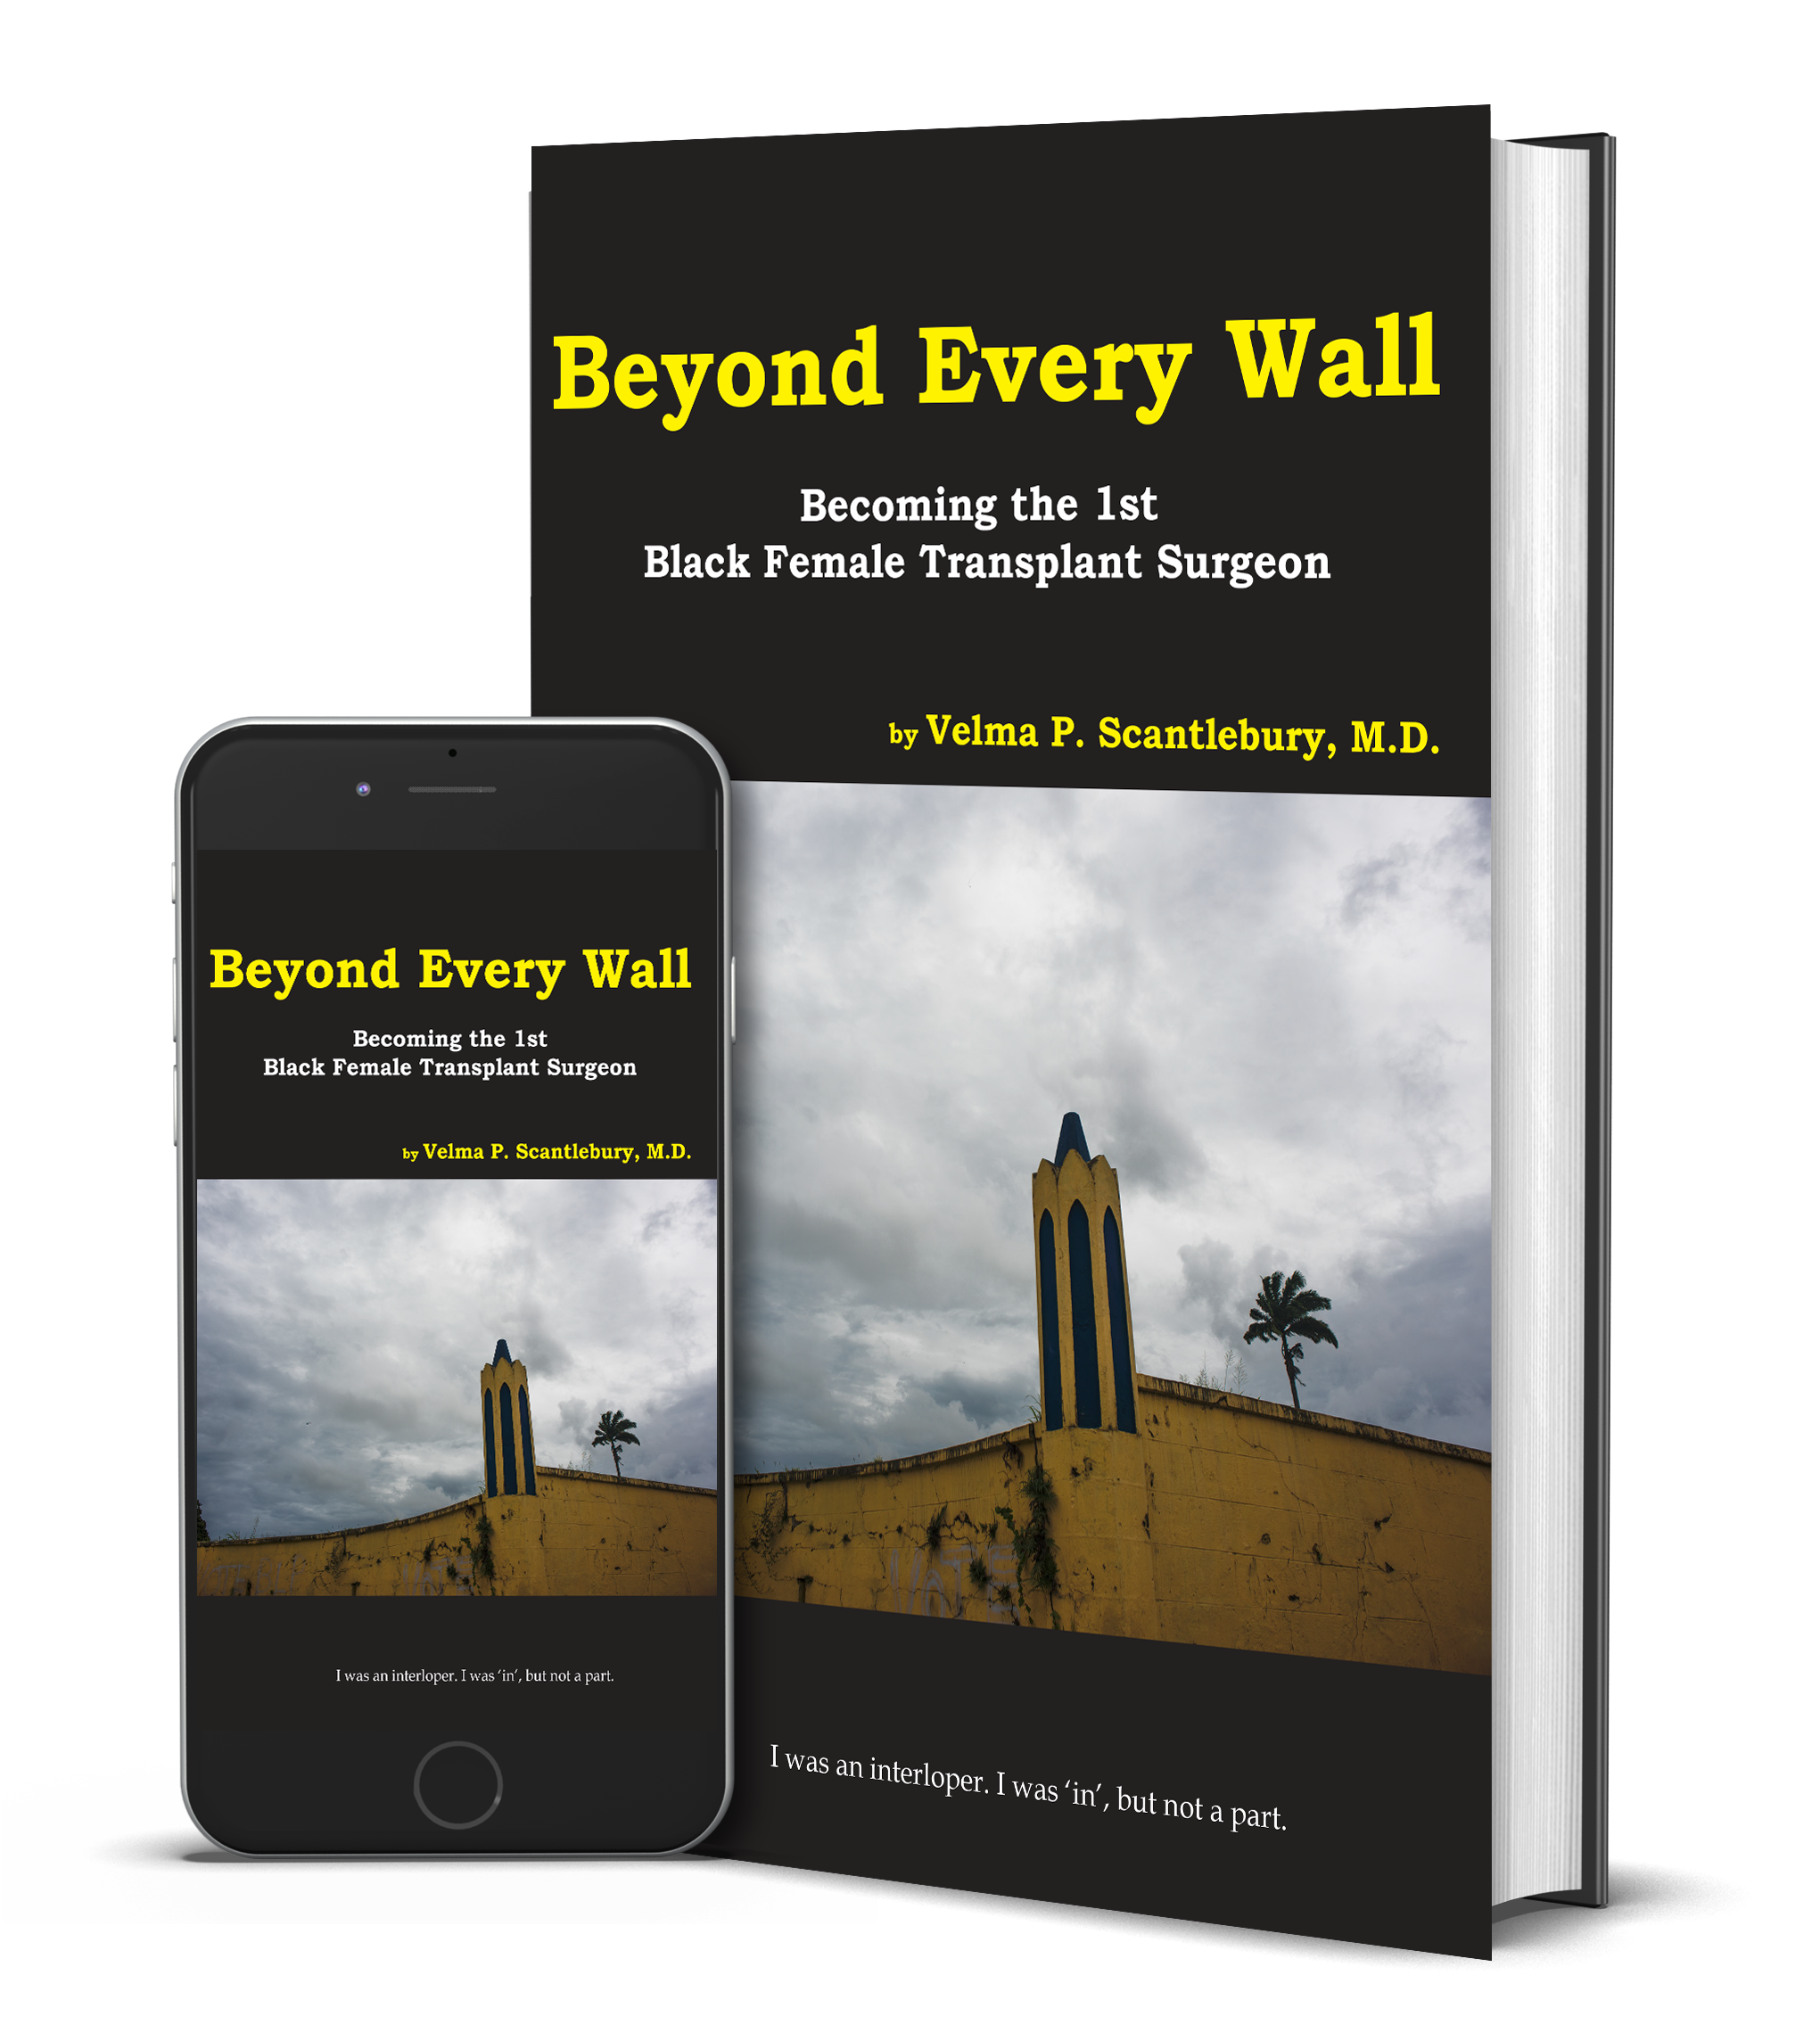 Beyond Every Wall book cover